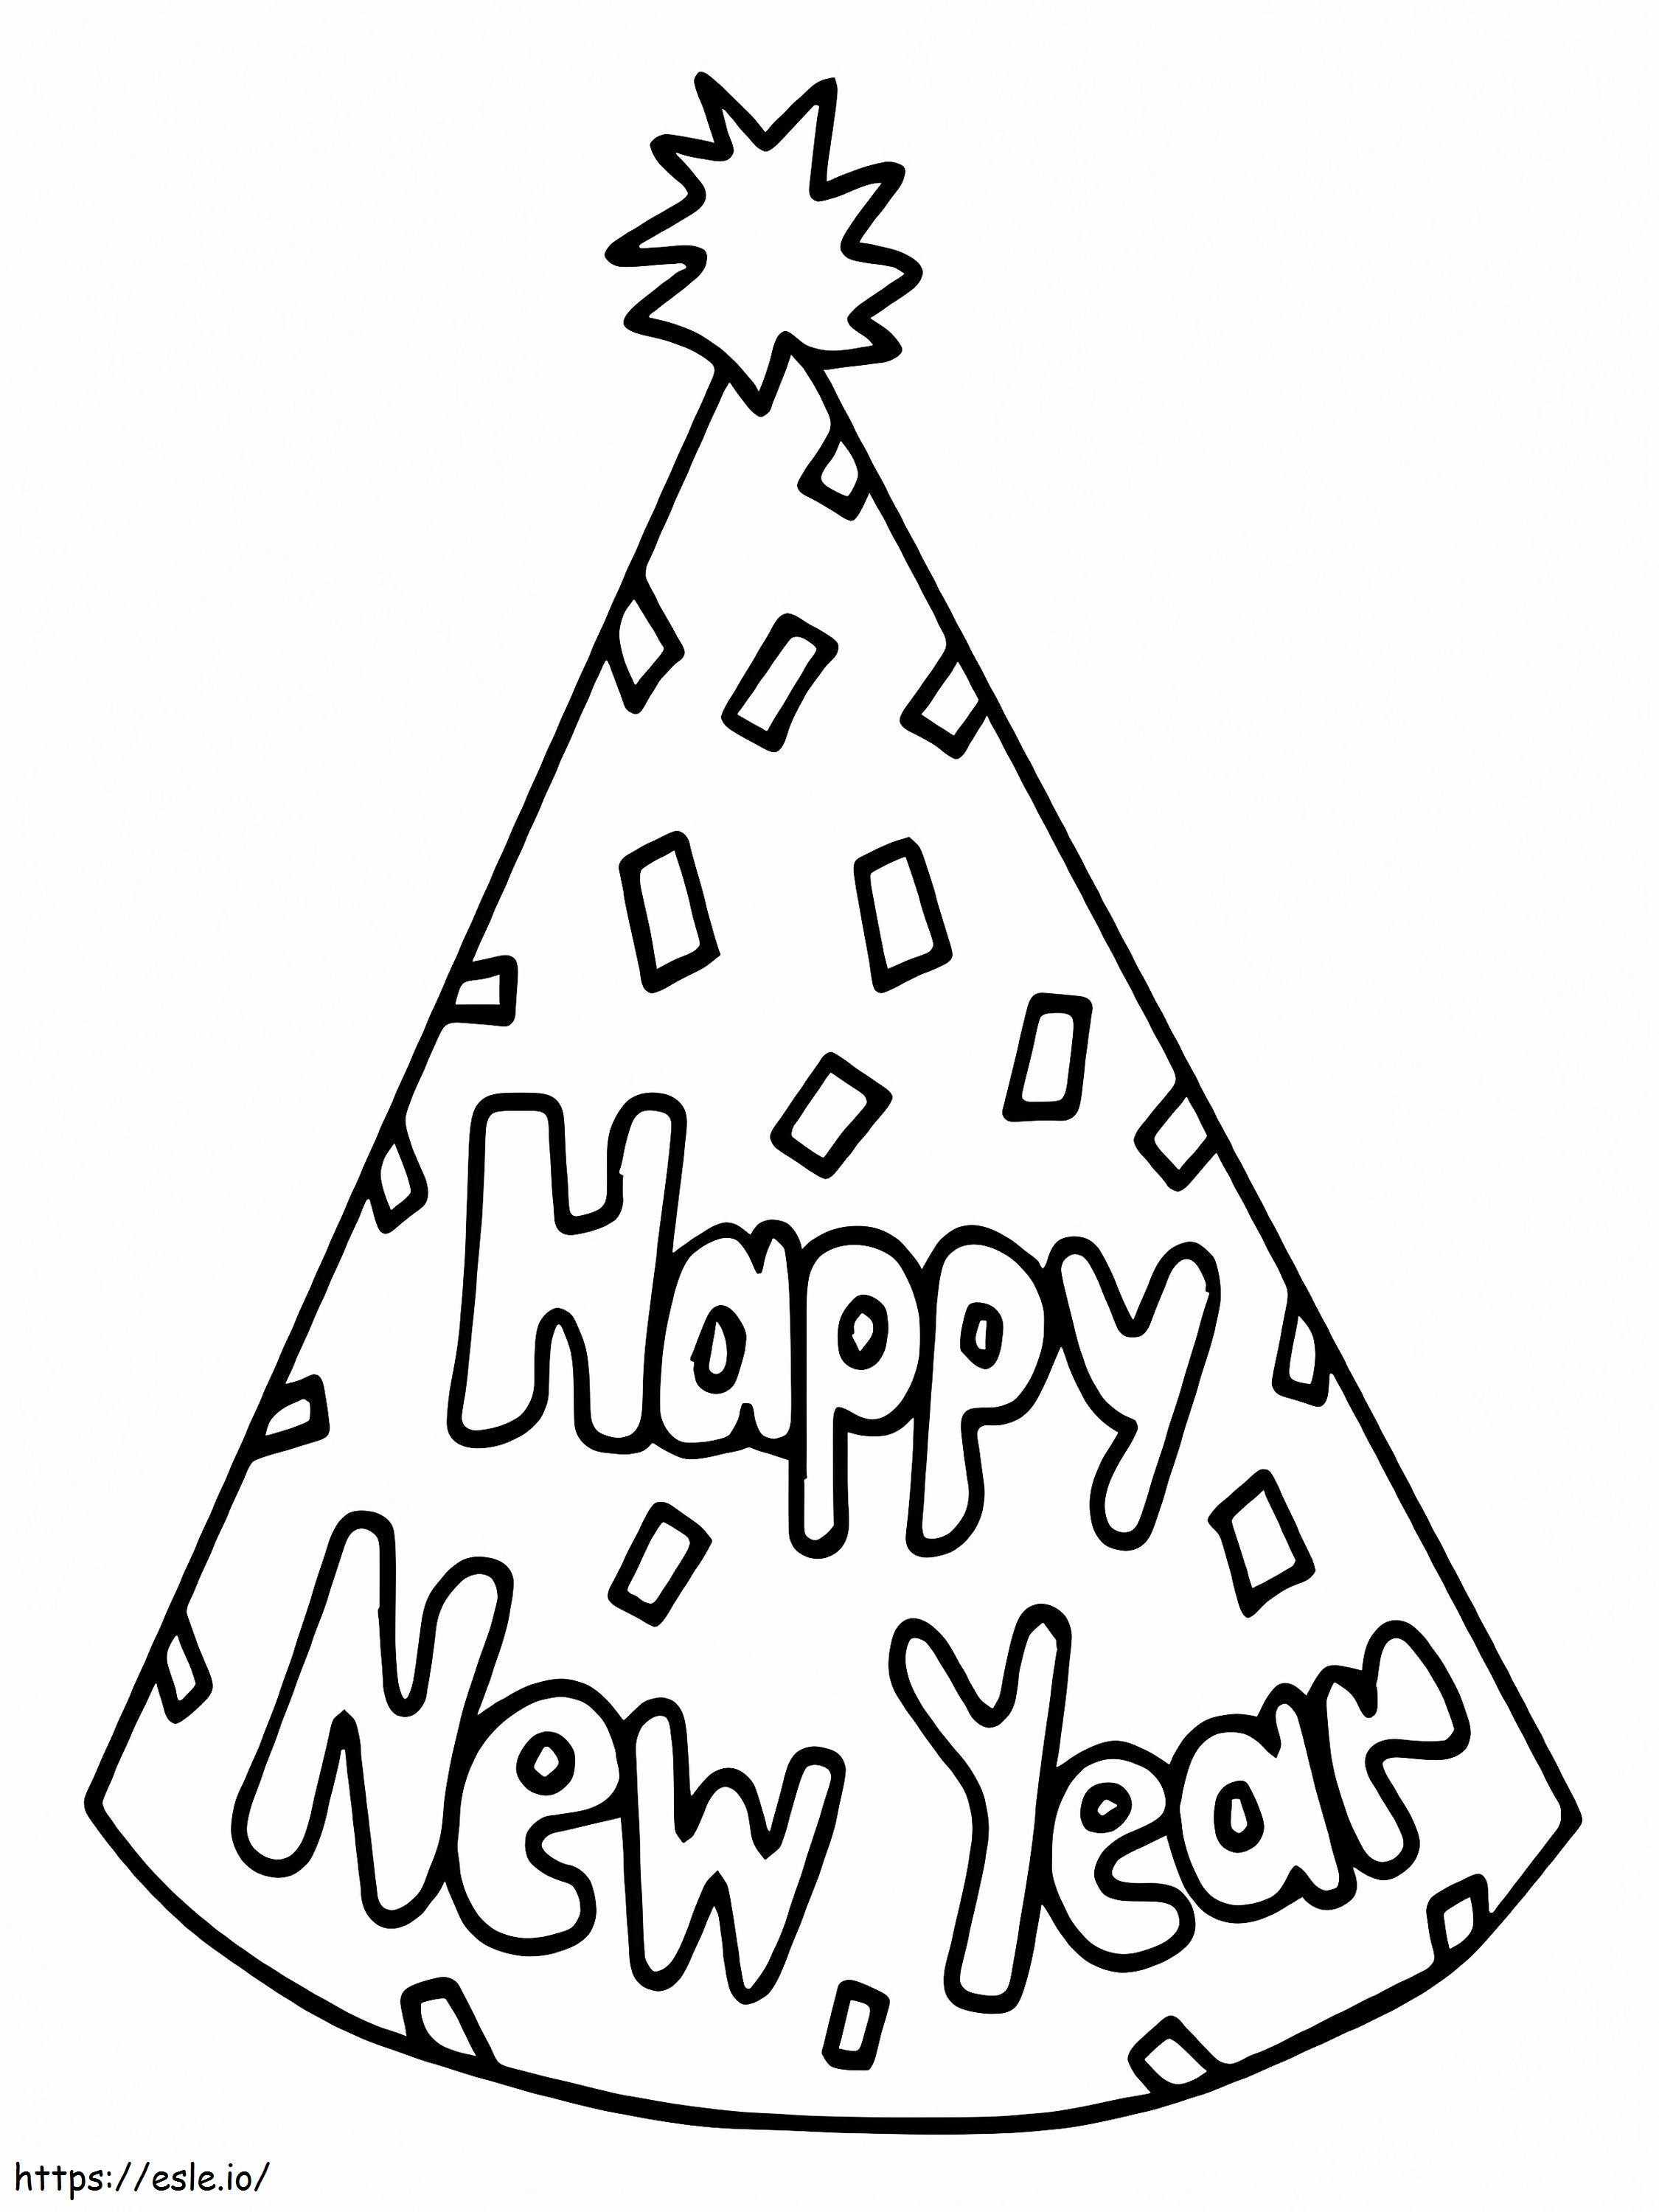 Party Hat Happy New Year Coloring Page coloring page